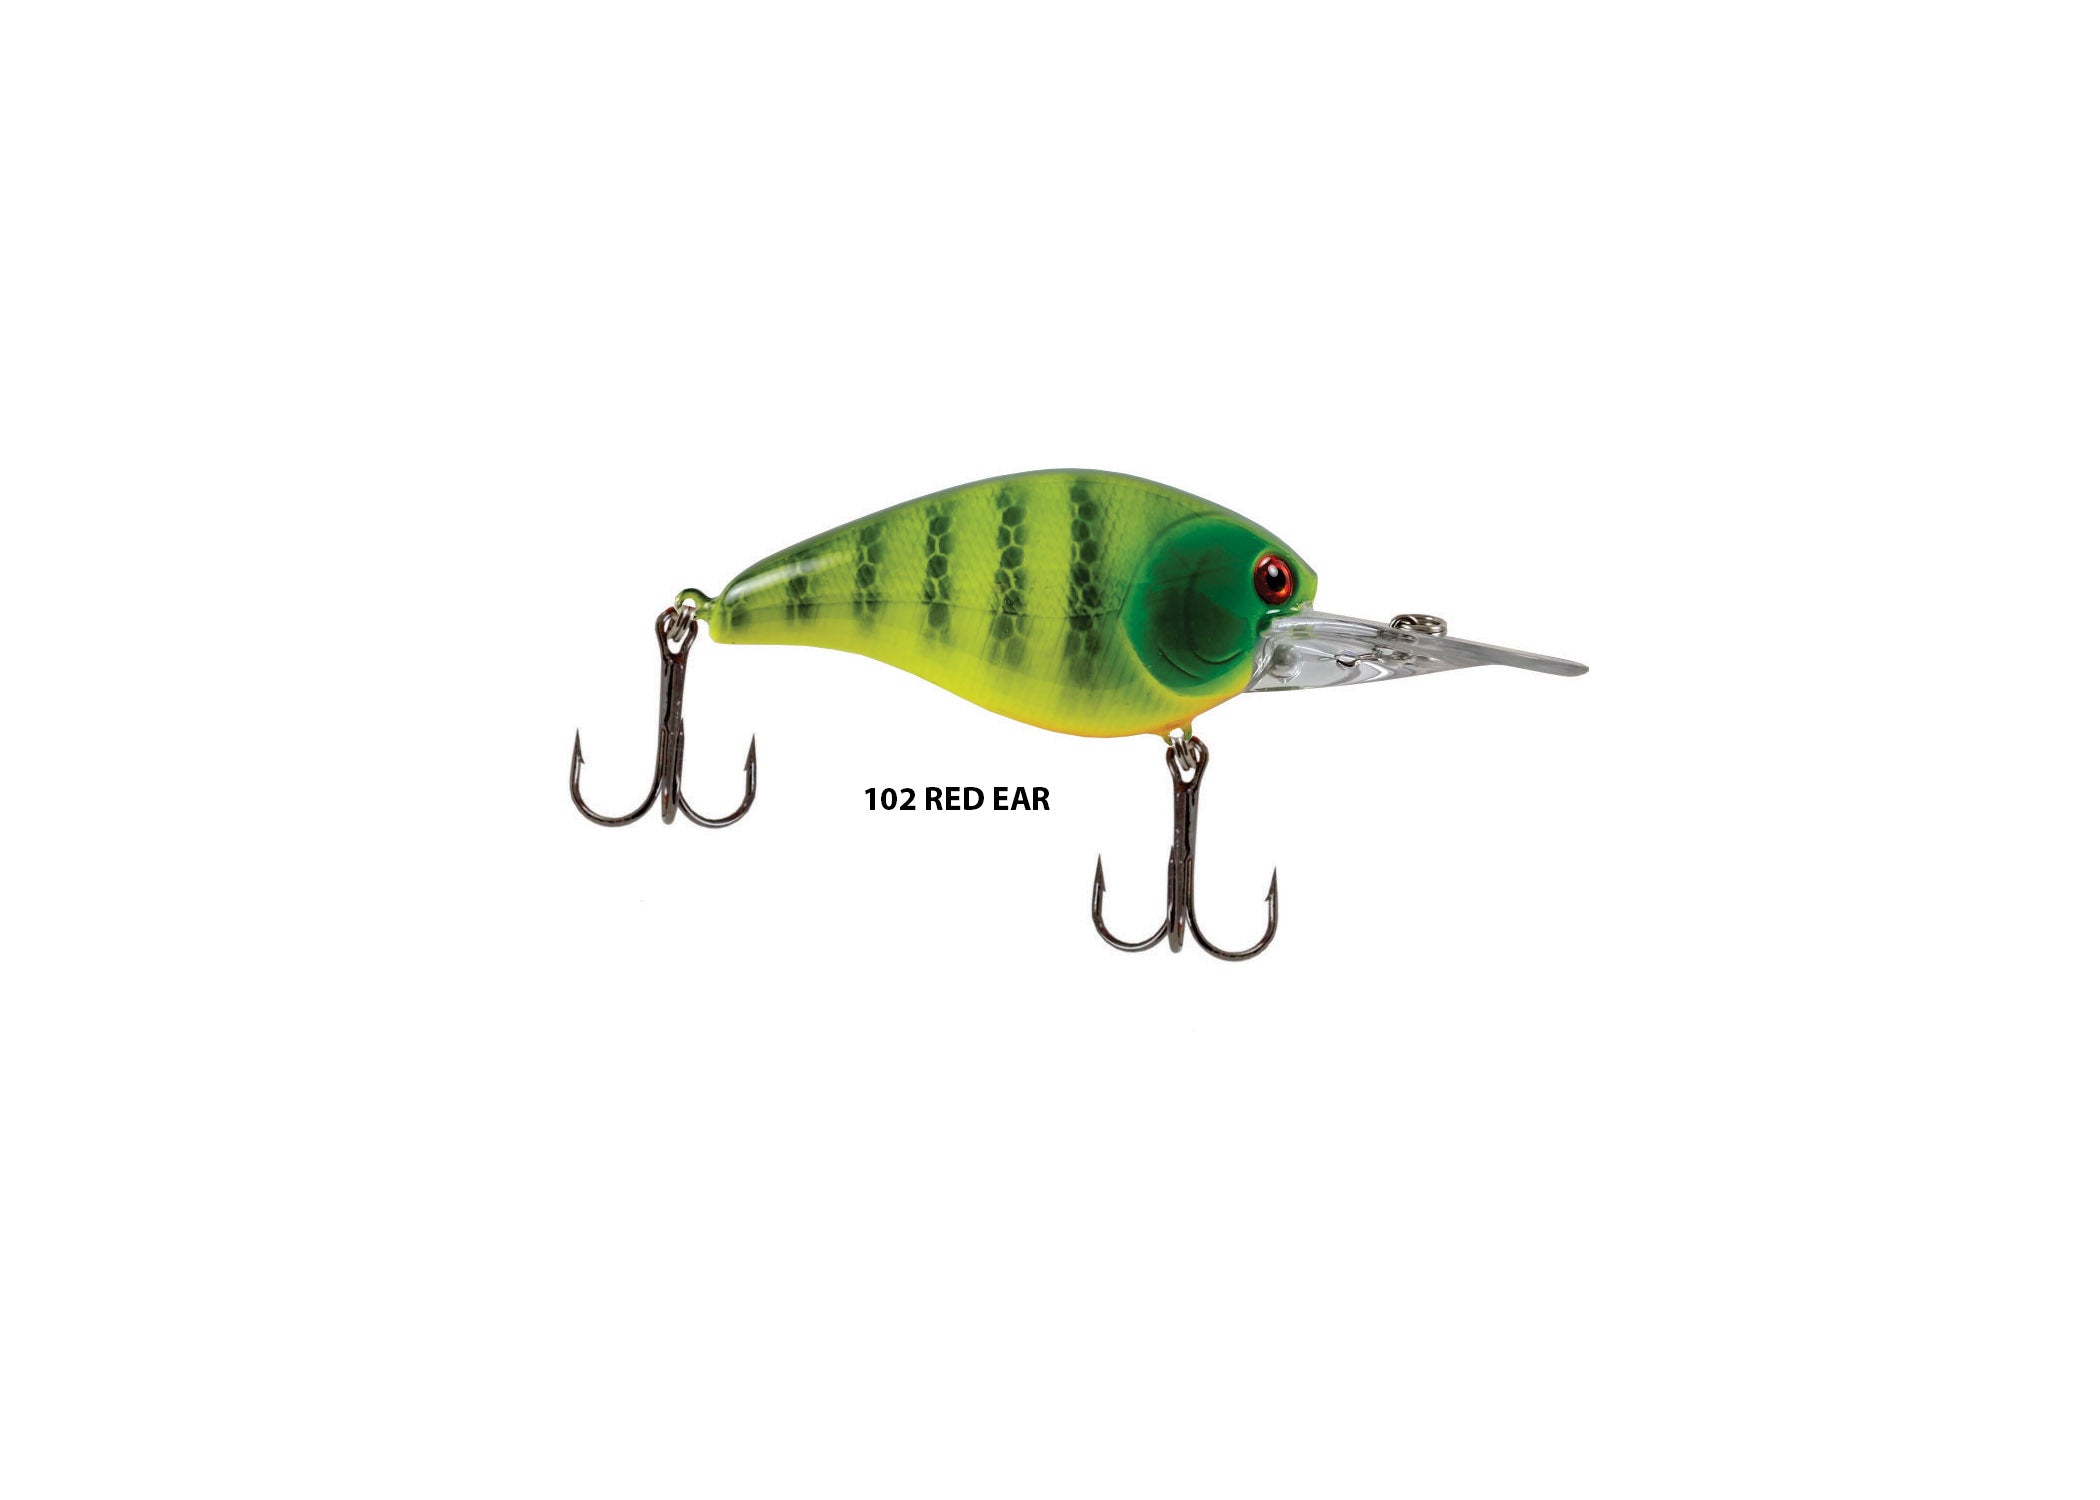 LURE LOT OF 2 ROGERS DEEP JIM & UNMARKED? NORMAN EB1-J22 